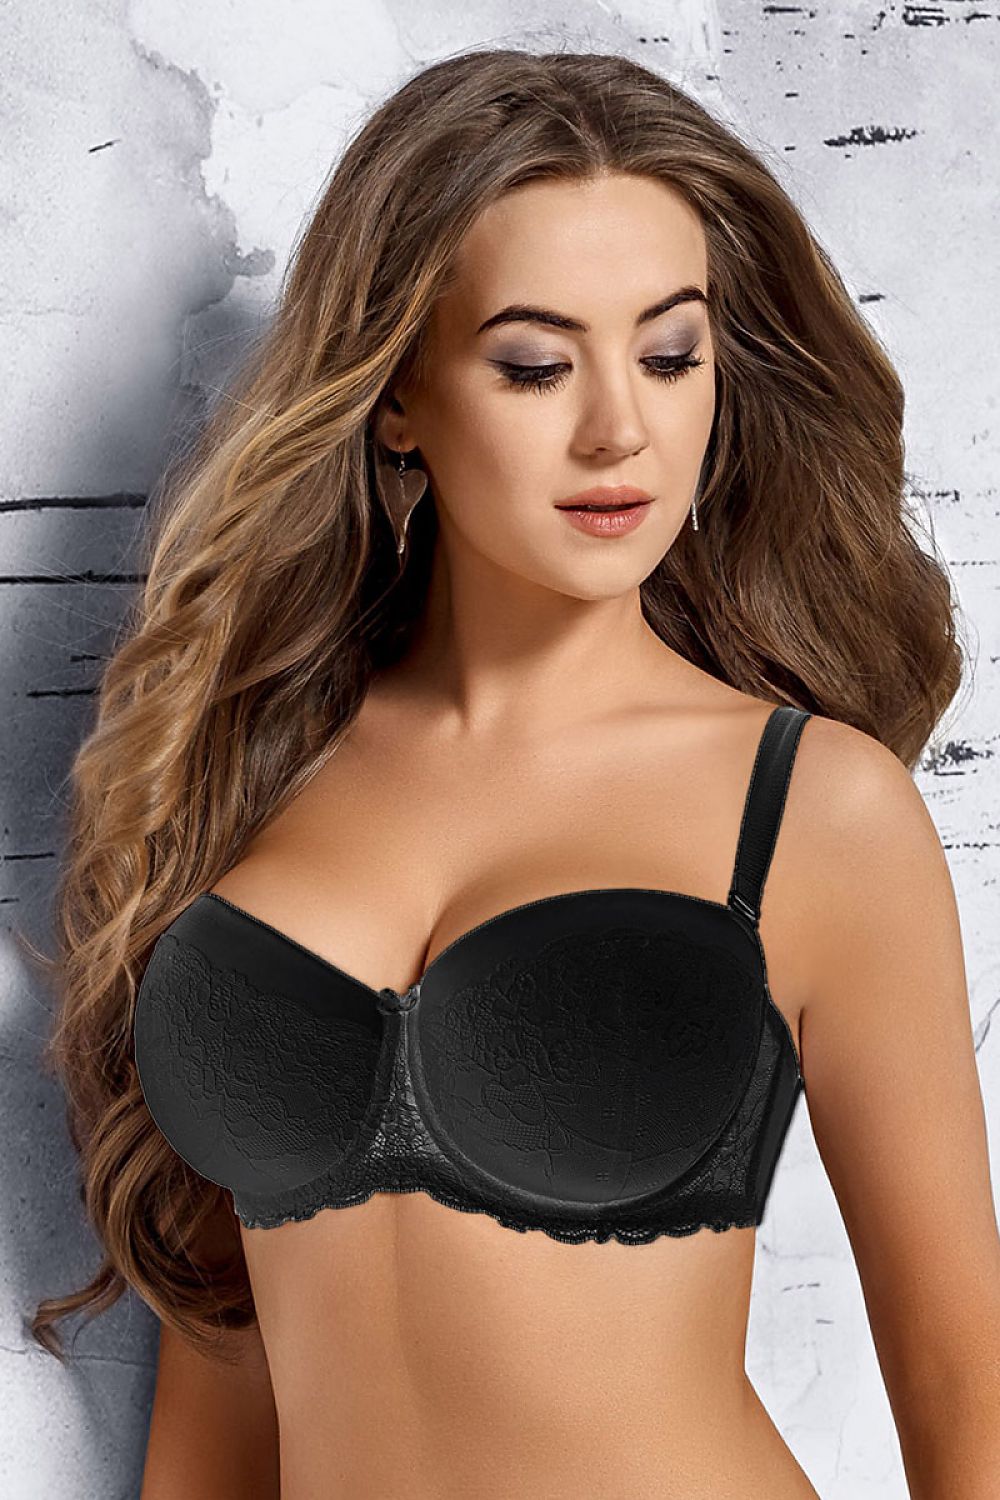 Wholesale Without Strips Bra Cotton, Lace, Seamless, Shaping